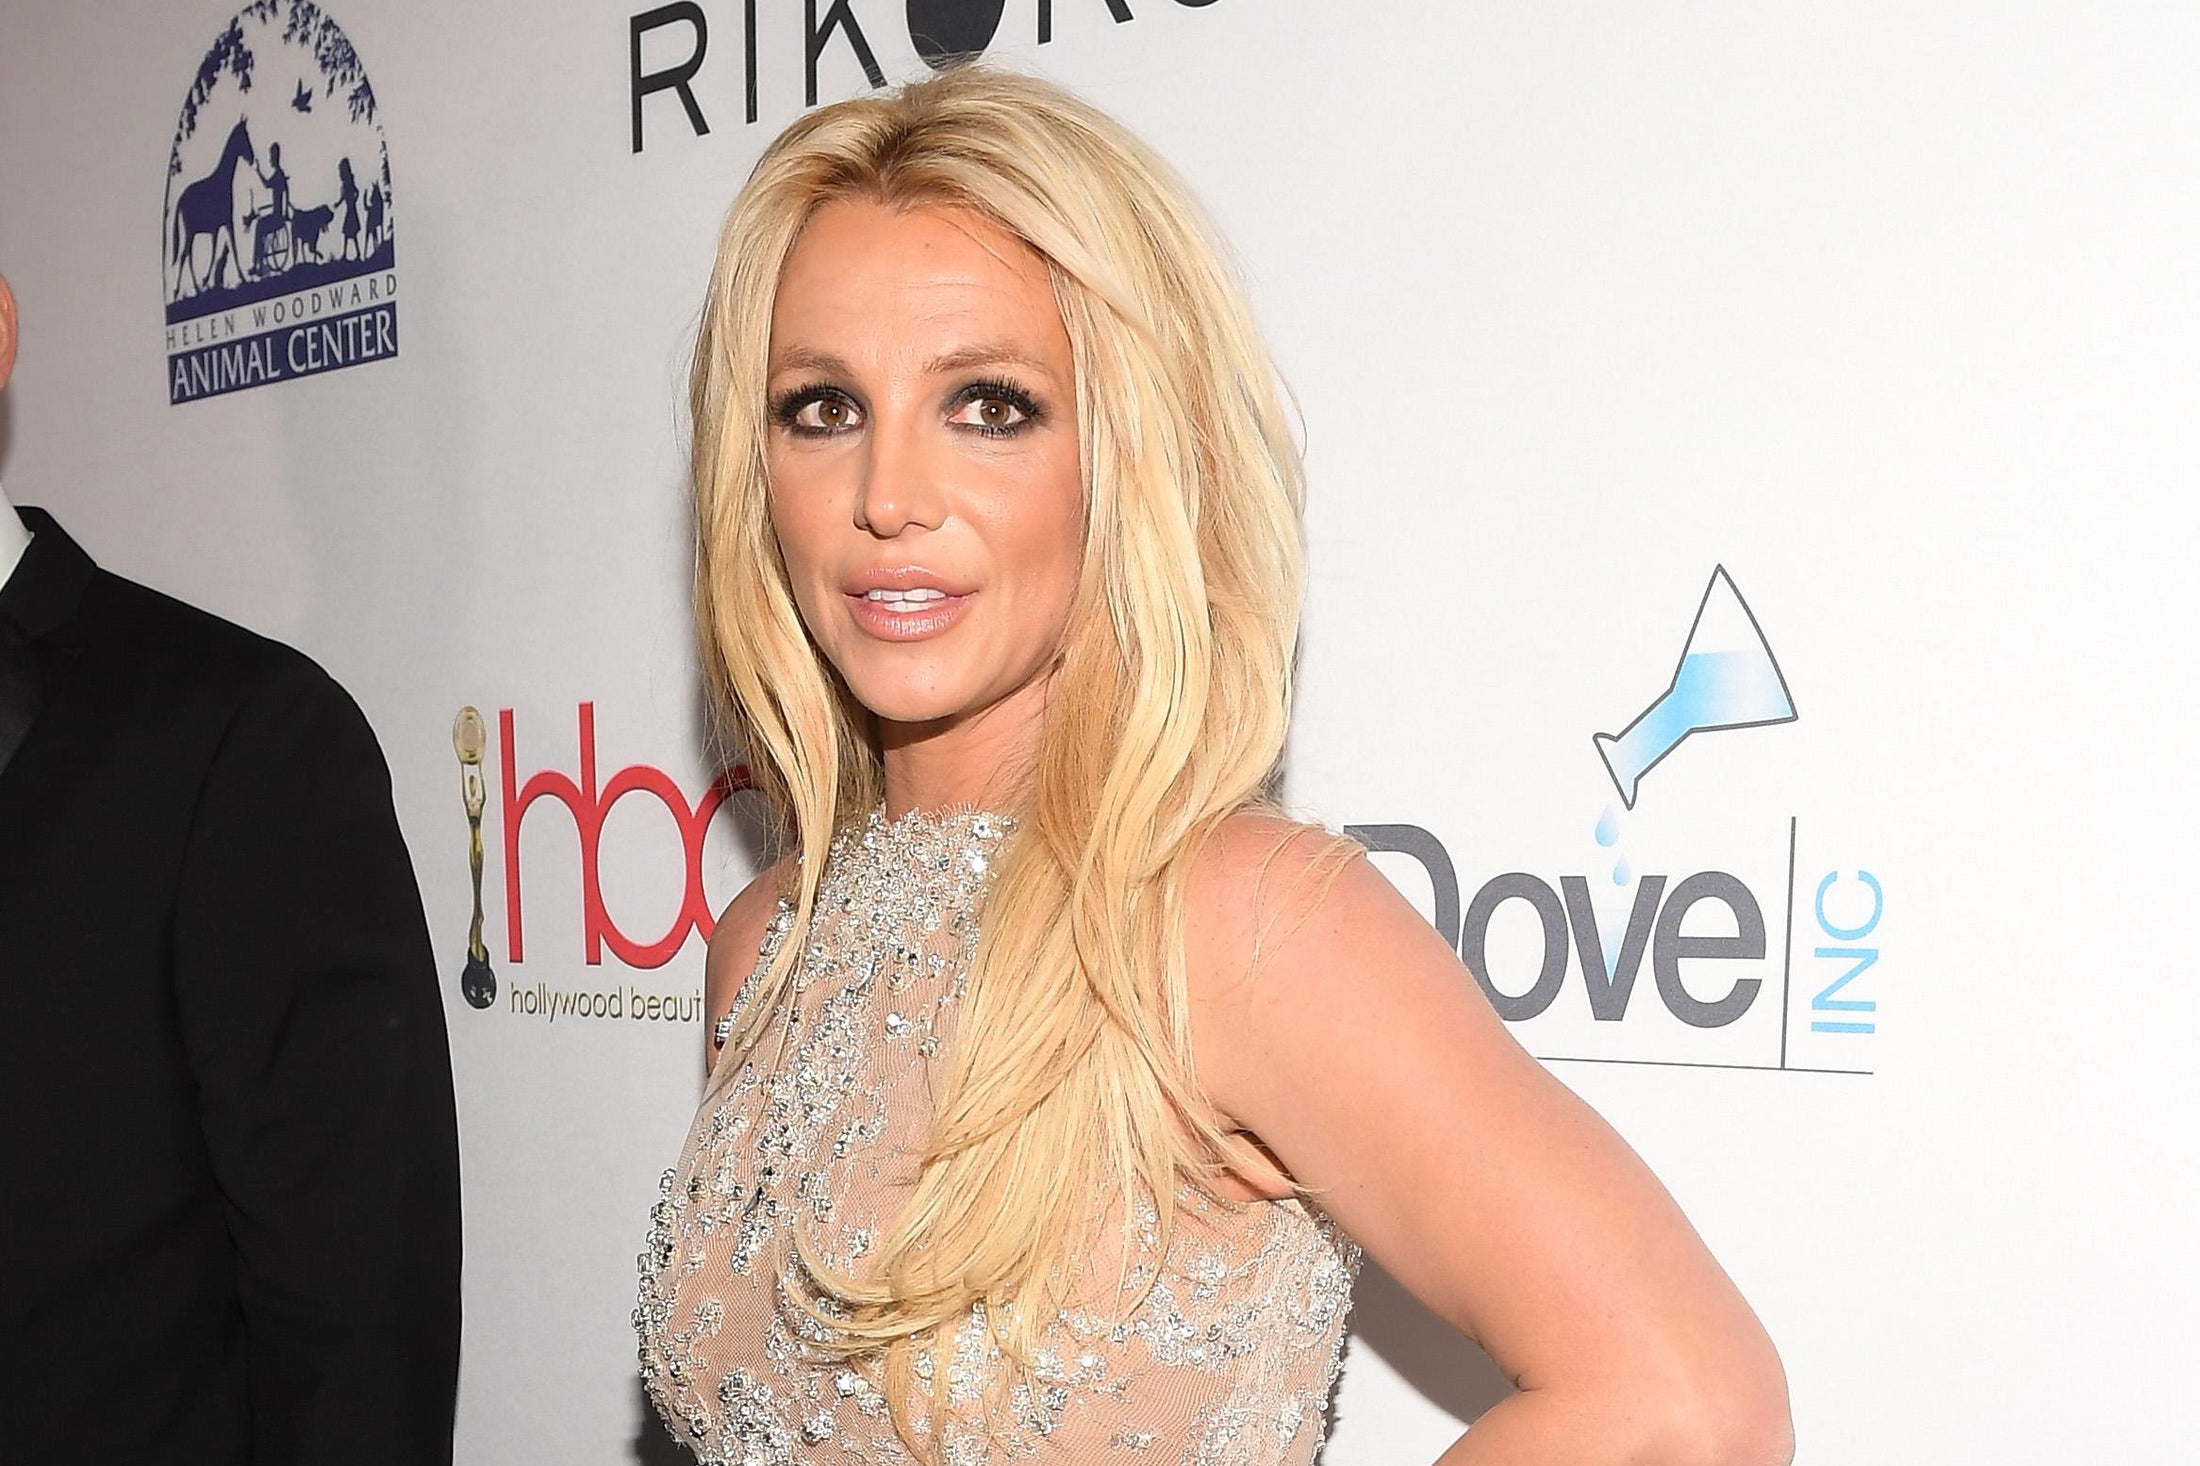 Britney Spears And Freebritney Explained Why She Had To Confirm Shes Not Being Held Hostage